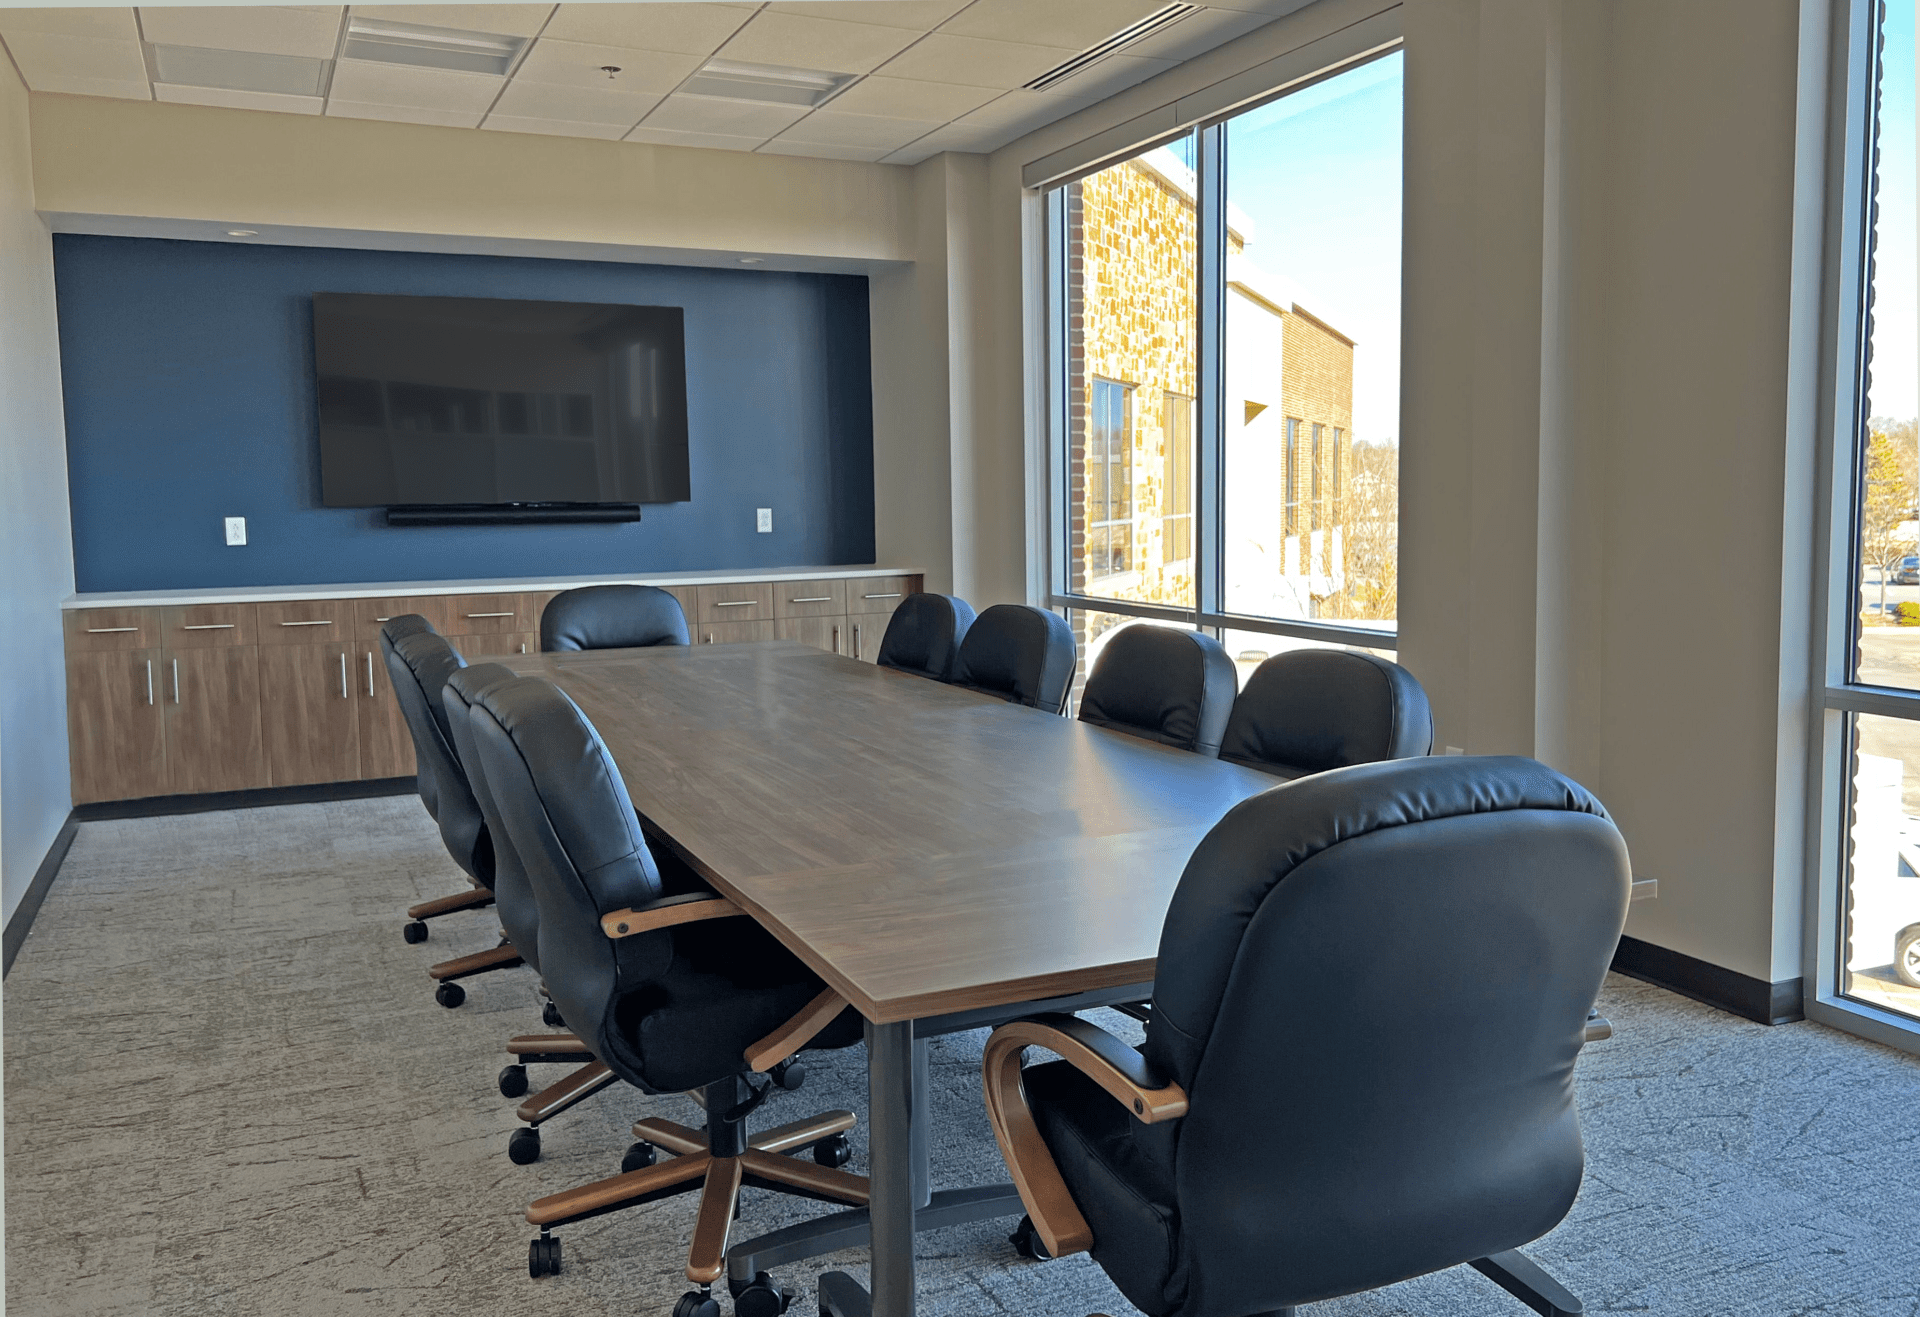 A conference room with a wall of windows.